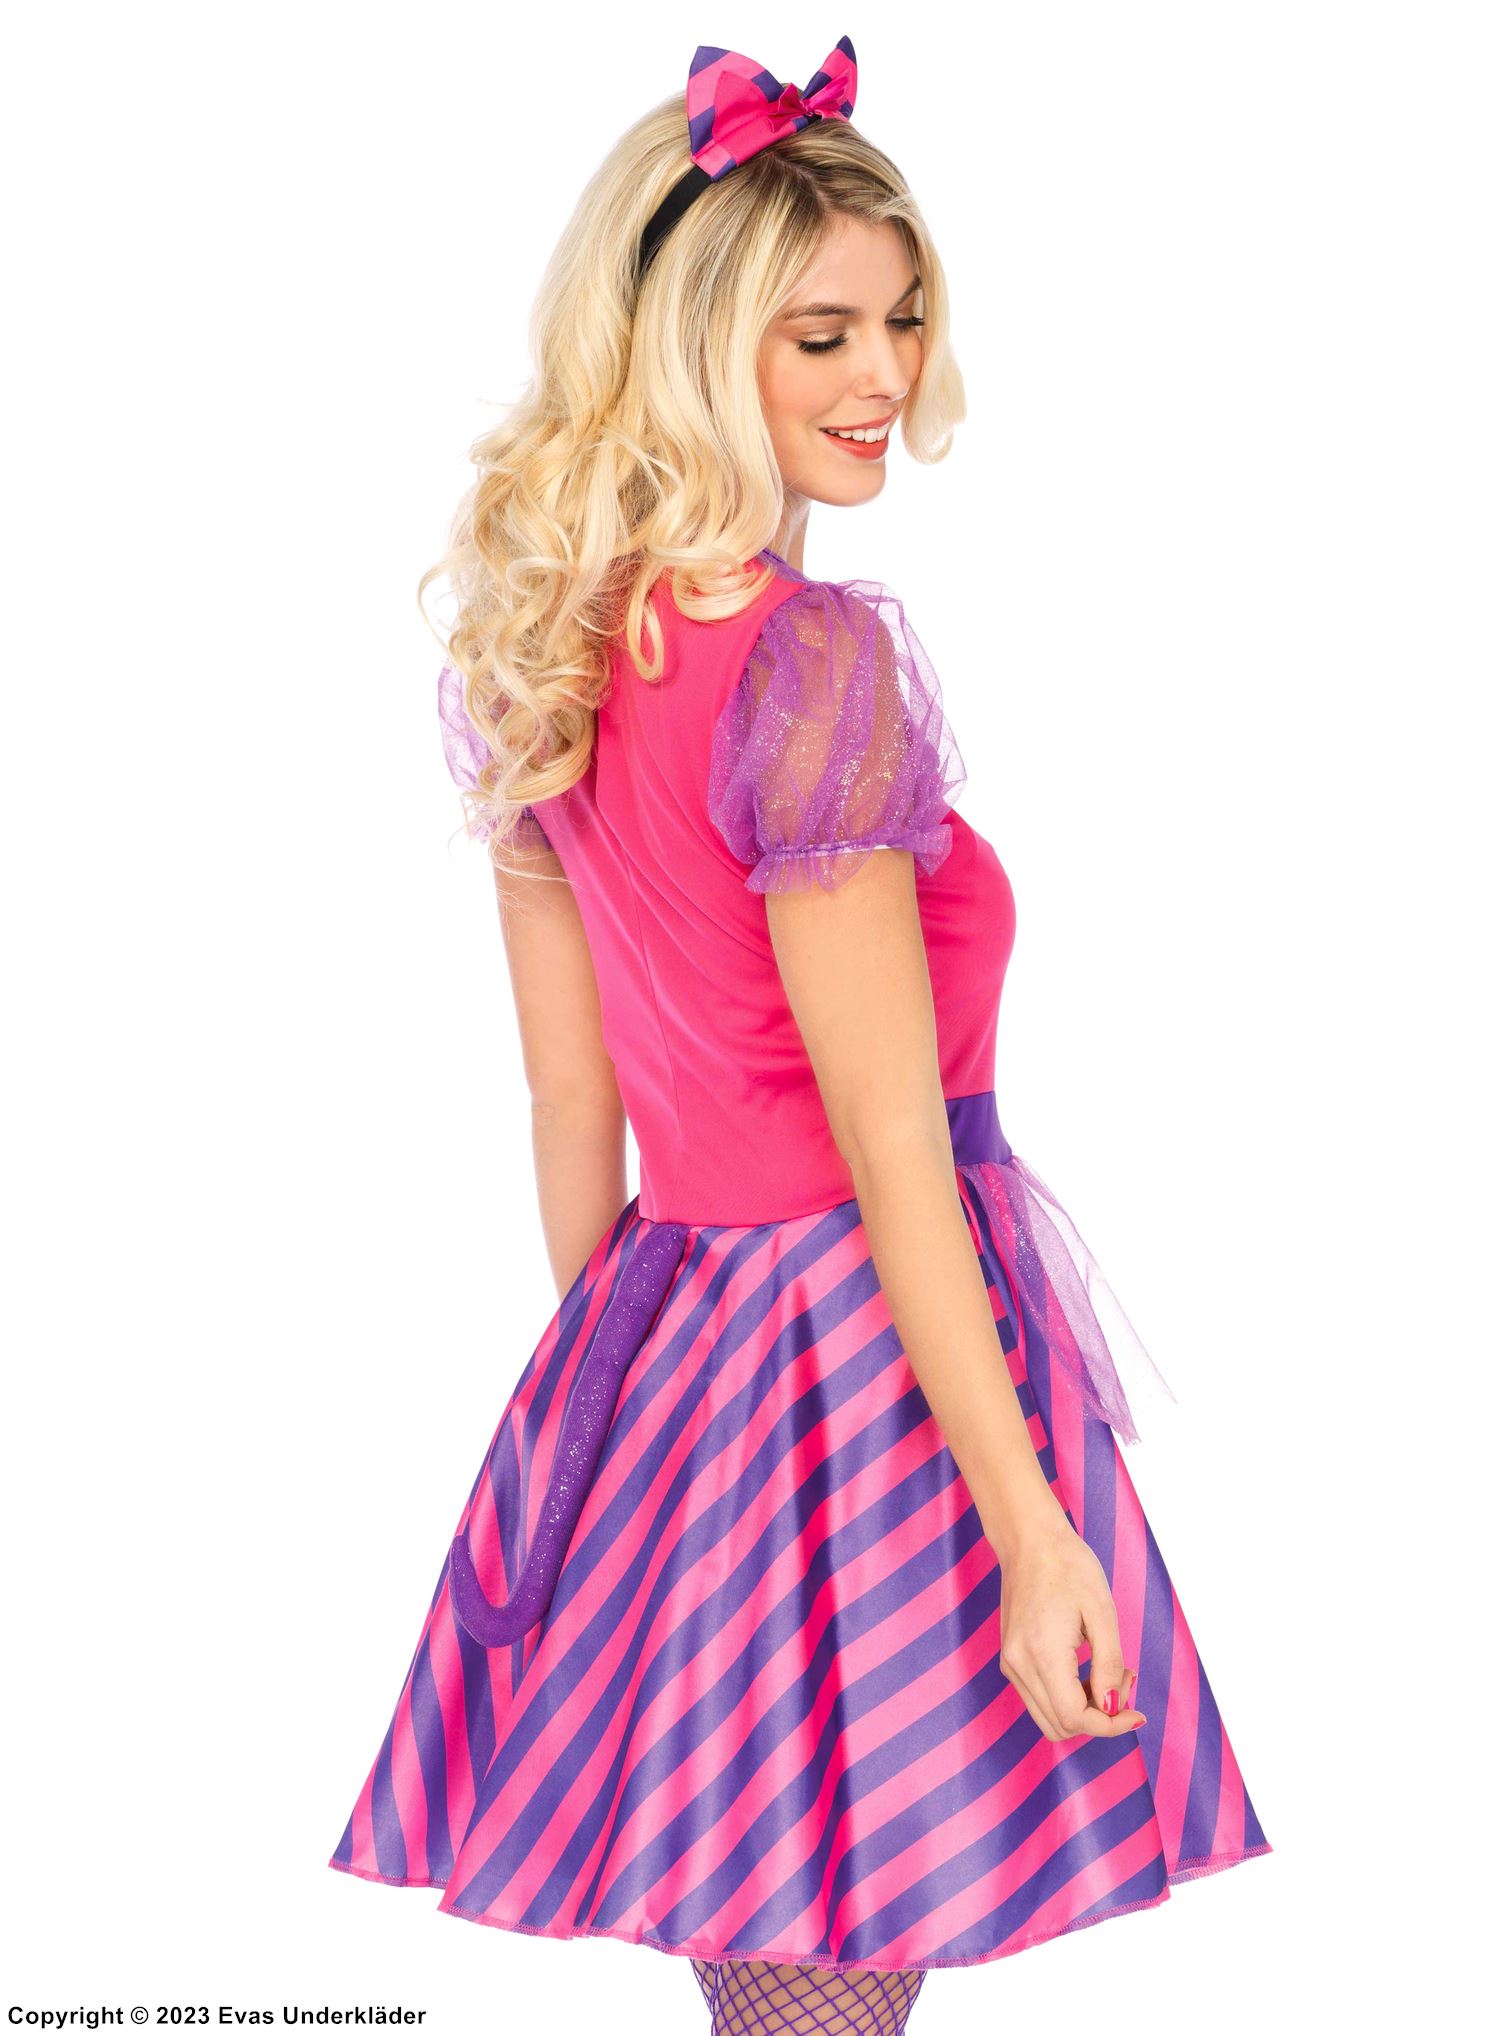 Female Cheshire Cat from Alice in Wonderland, costume dress, tail, puff sleeves, colorful stripes